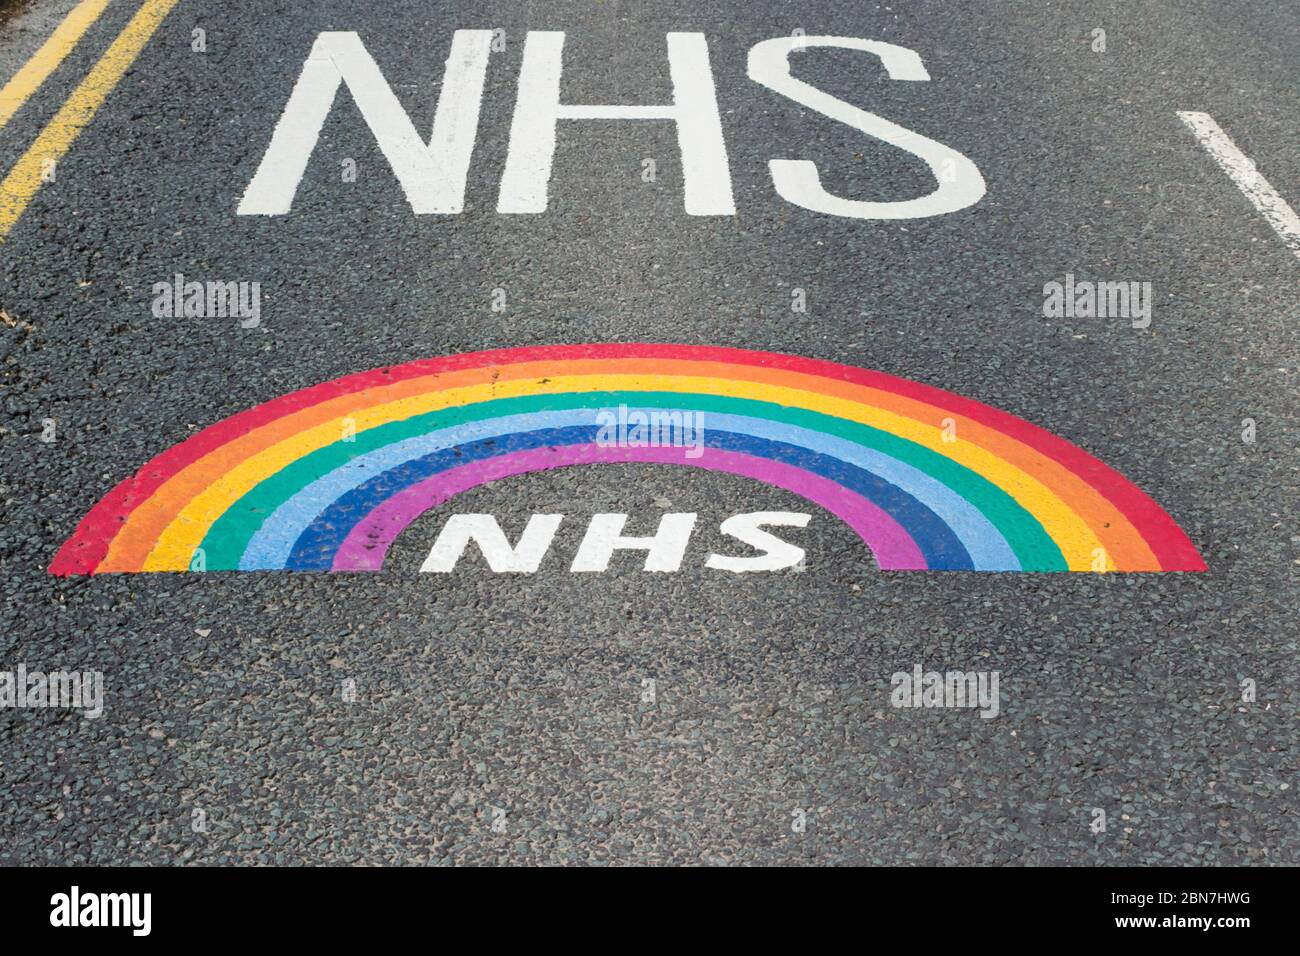 NHS rainbow message painted on the road, part of a 'Thank You NHS' message painted professionally on Minerva Raod, Bolton, on the approach to the Roya Stock Photo